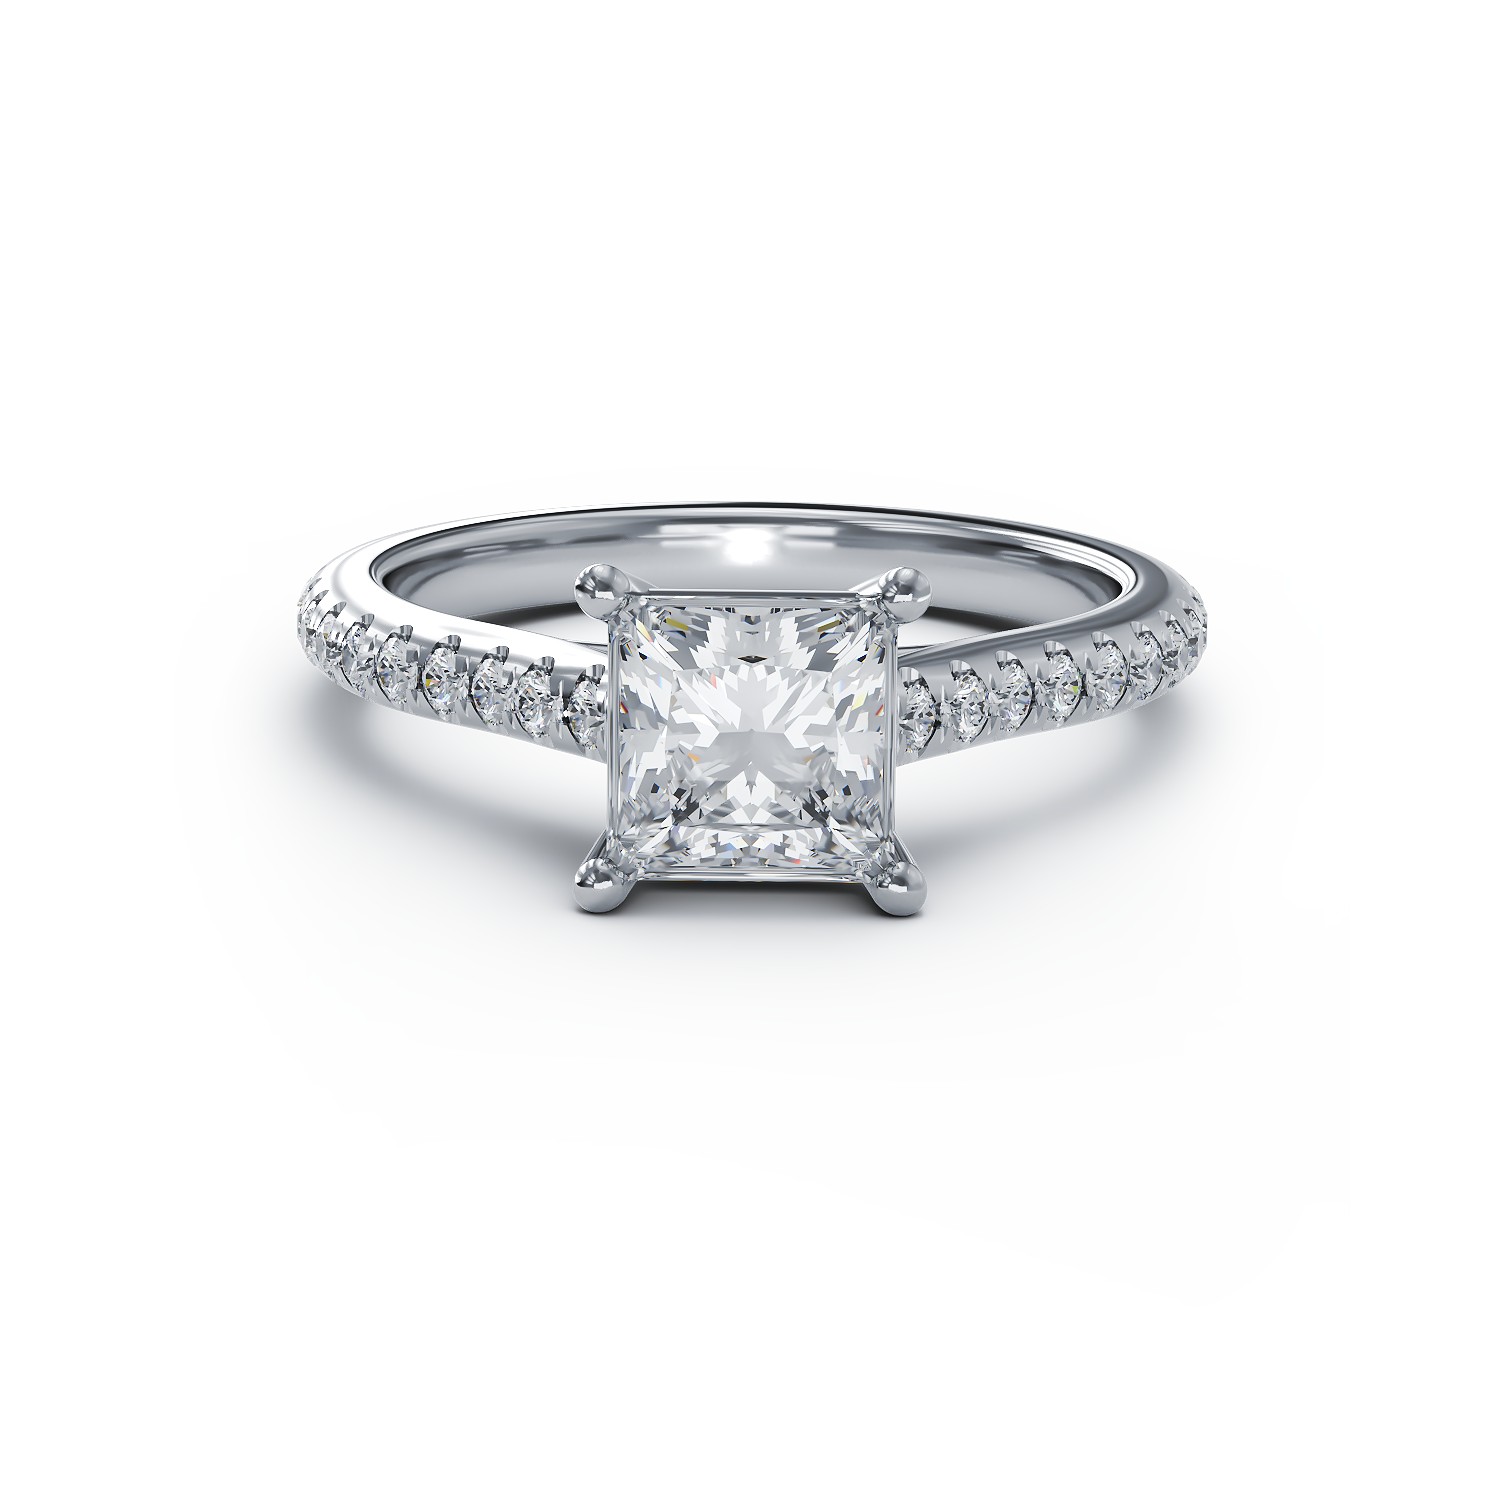 18K white gold engagement ring with 1.5ct diamond and 0.33ct diamonds